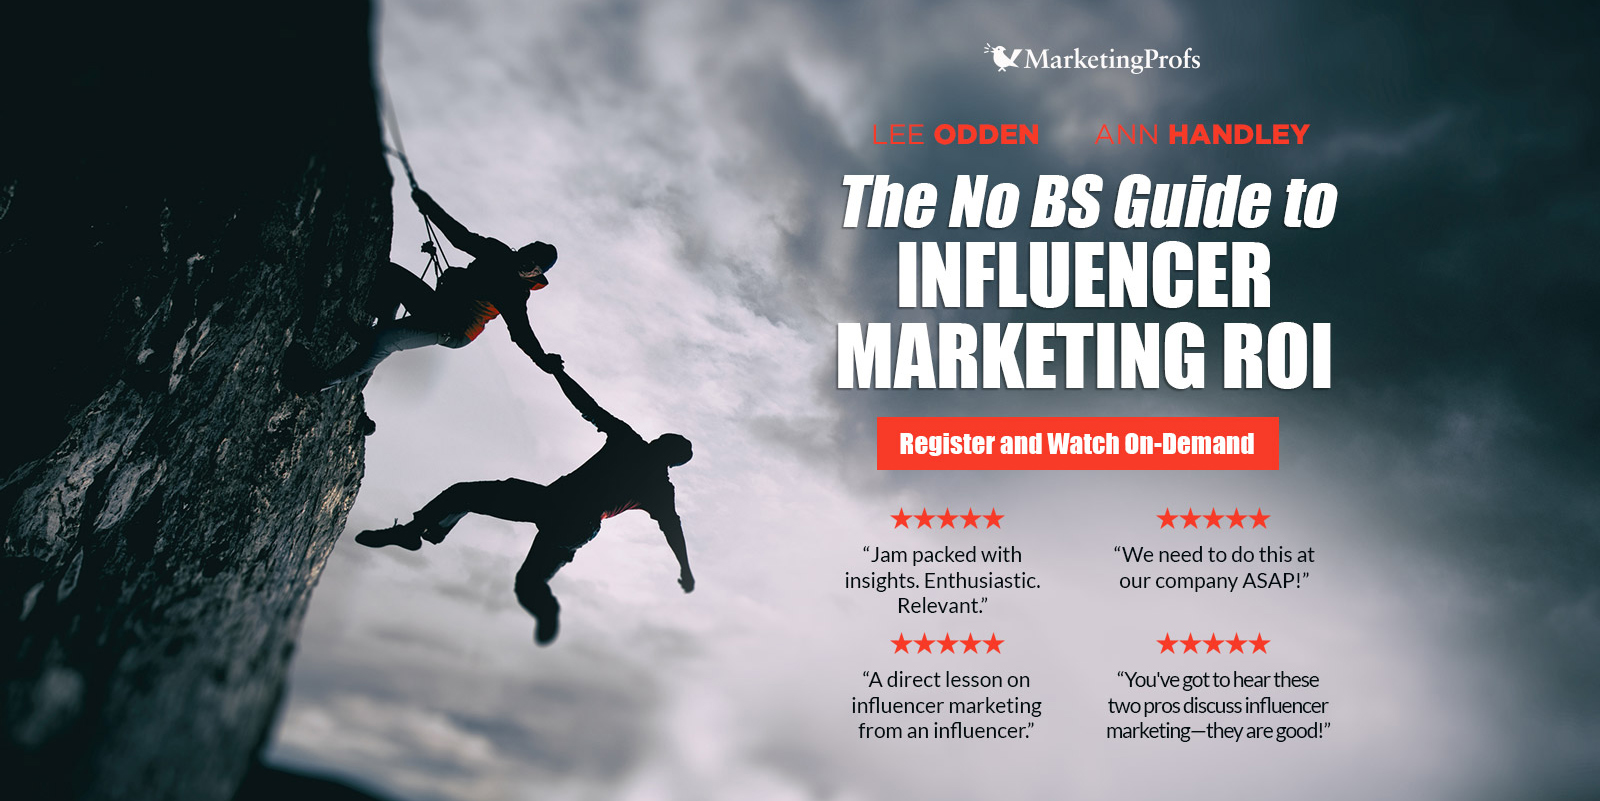 The No BS Guide to Influencer Marketing ROI: Register Now and Watch On-Demand!